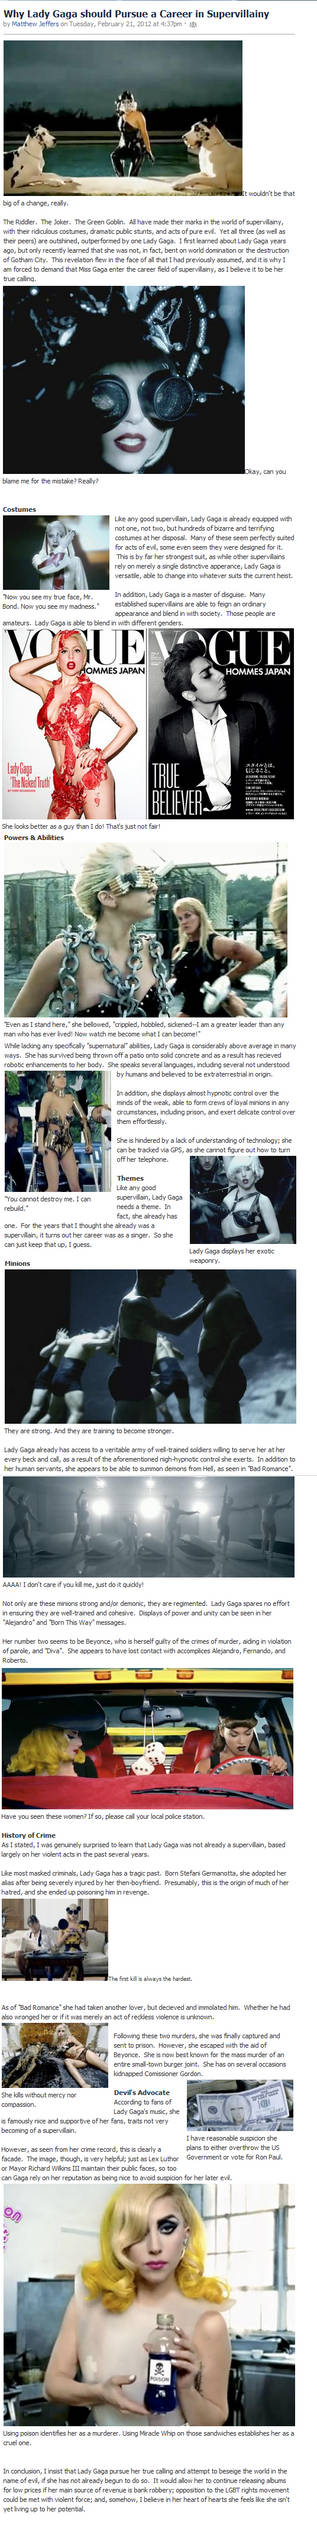 Why Lady Gaga should become a Supervillain